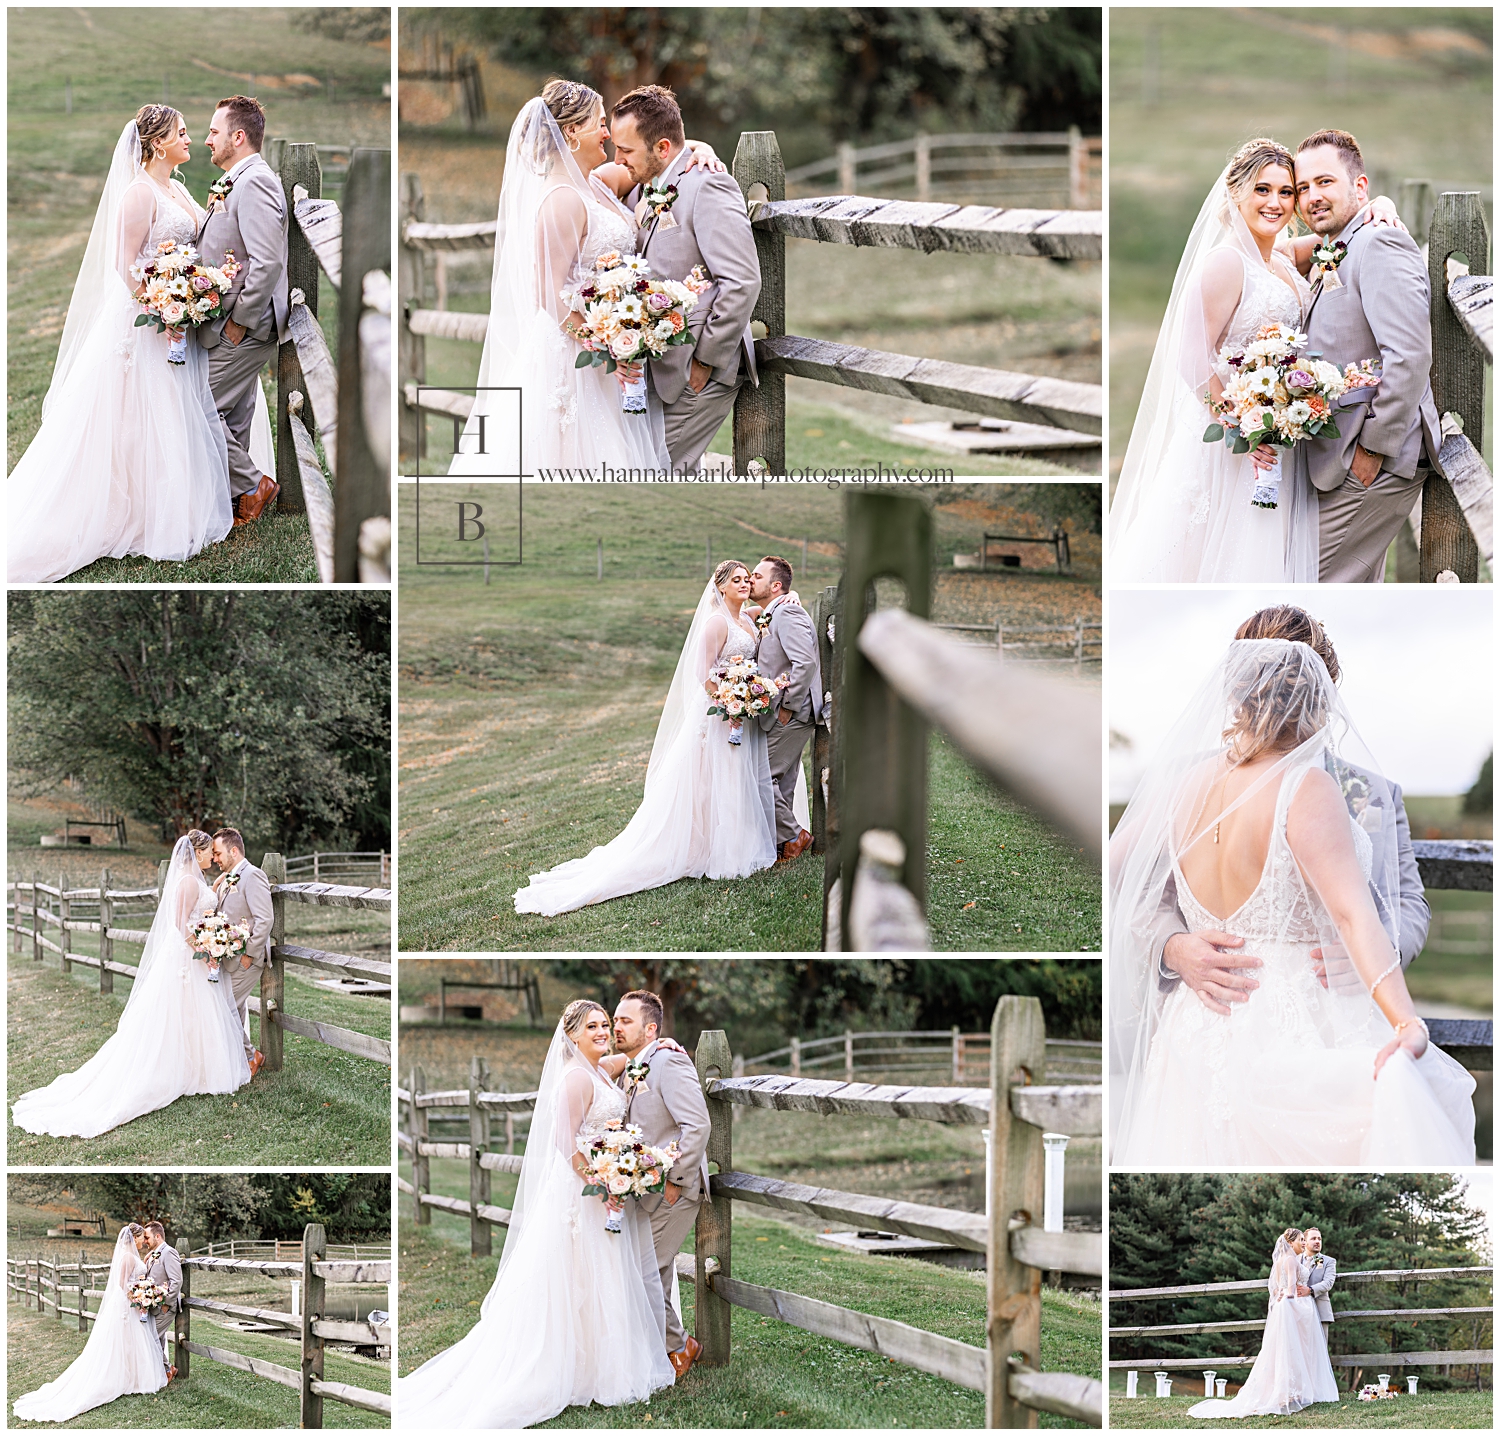 Groom leans against fence and embraces bride for wedding photos.